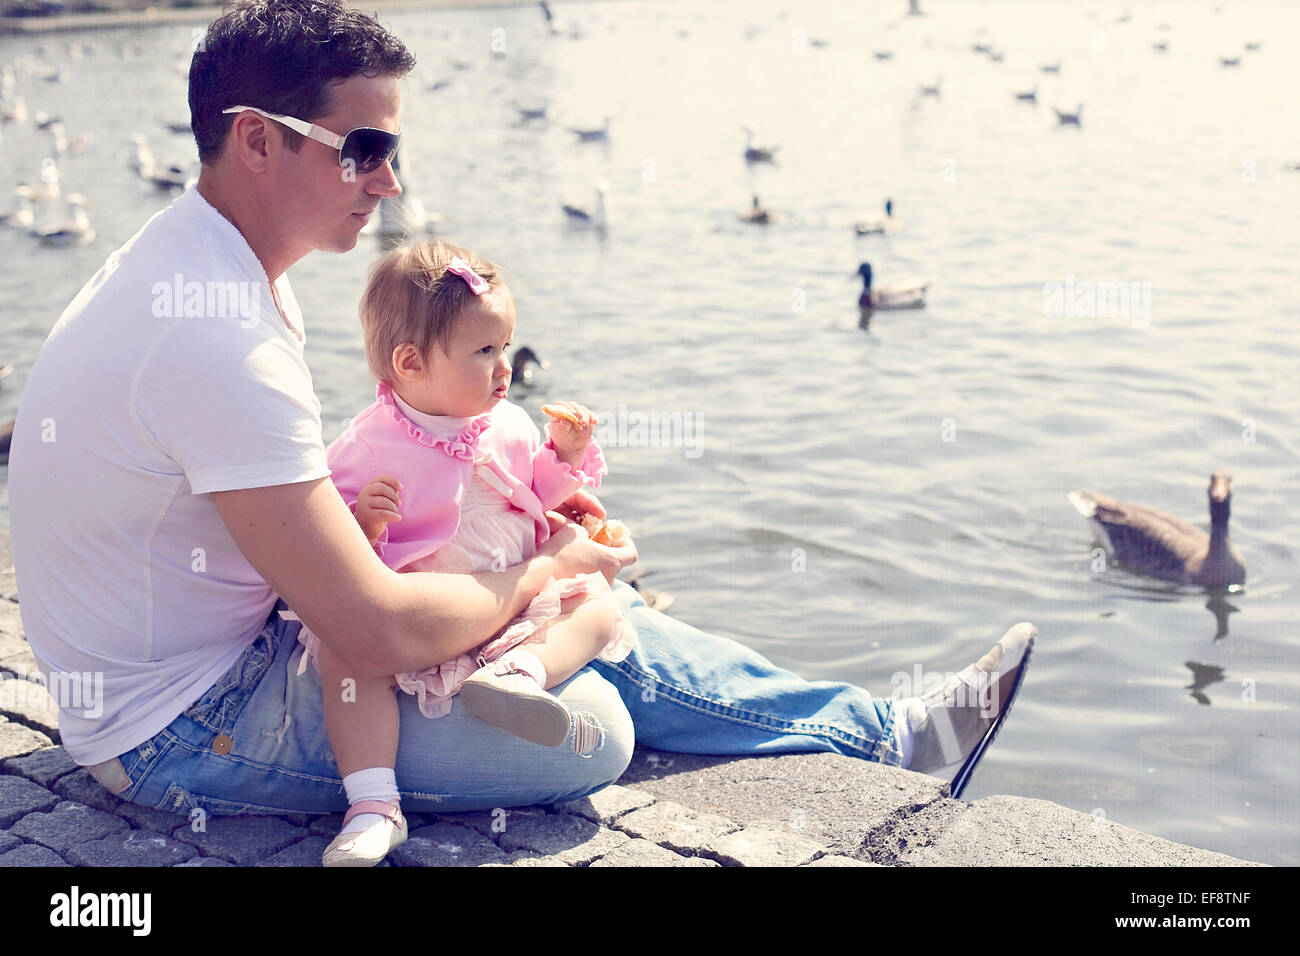 Iceland, Father and daughter (12-17months) sitting by lake with swimming ducks Stock Photo